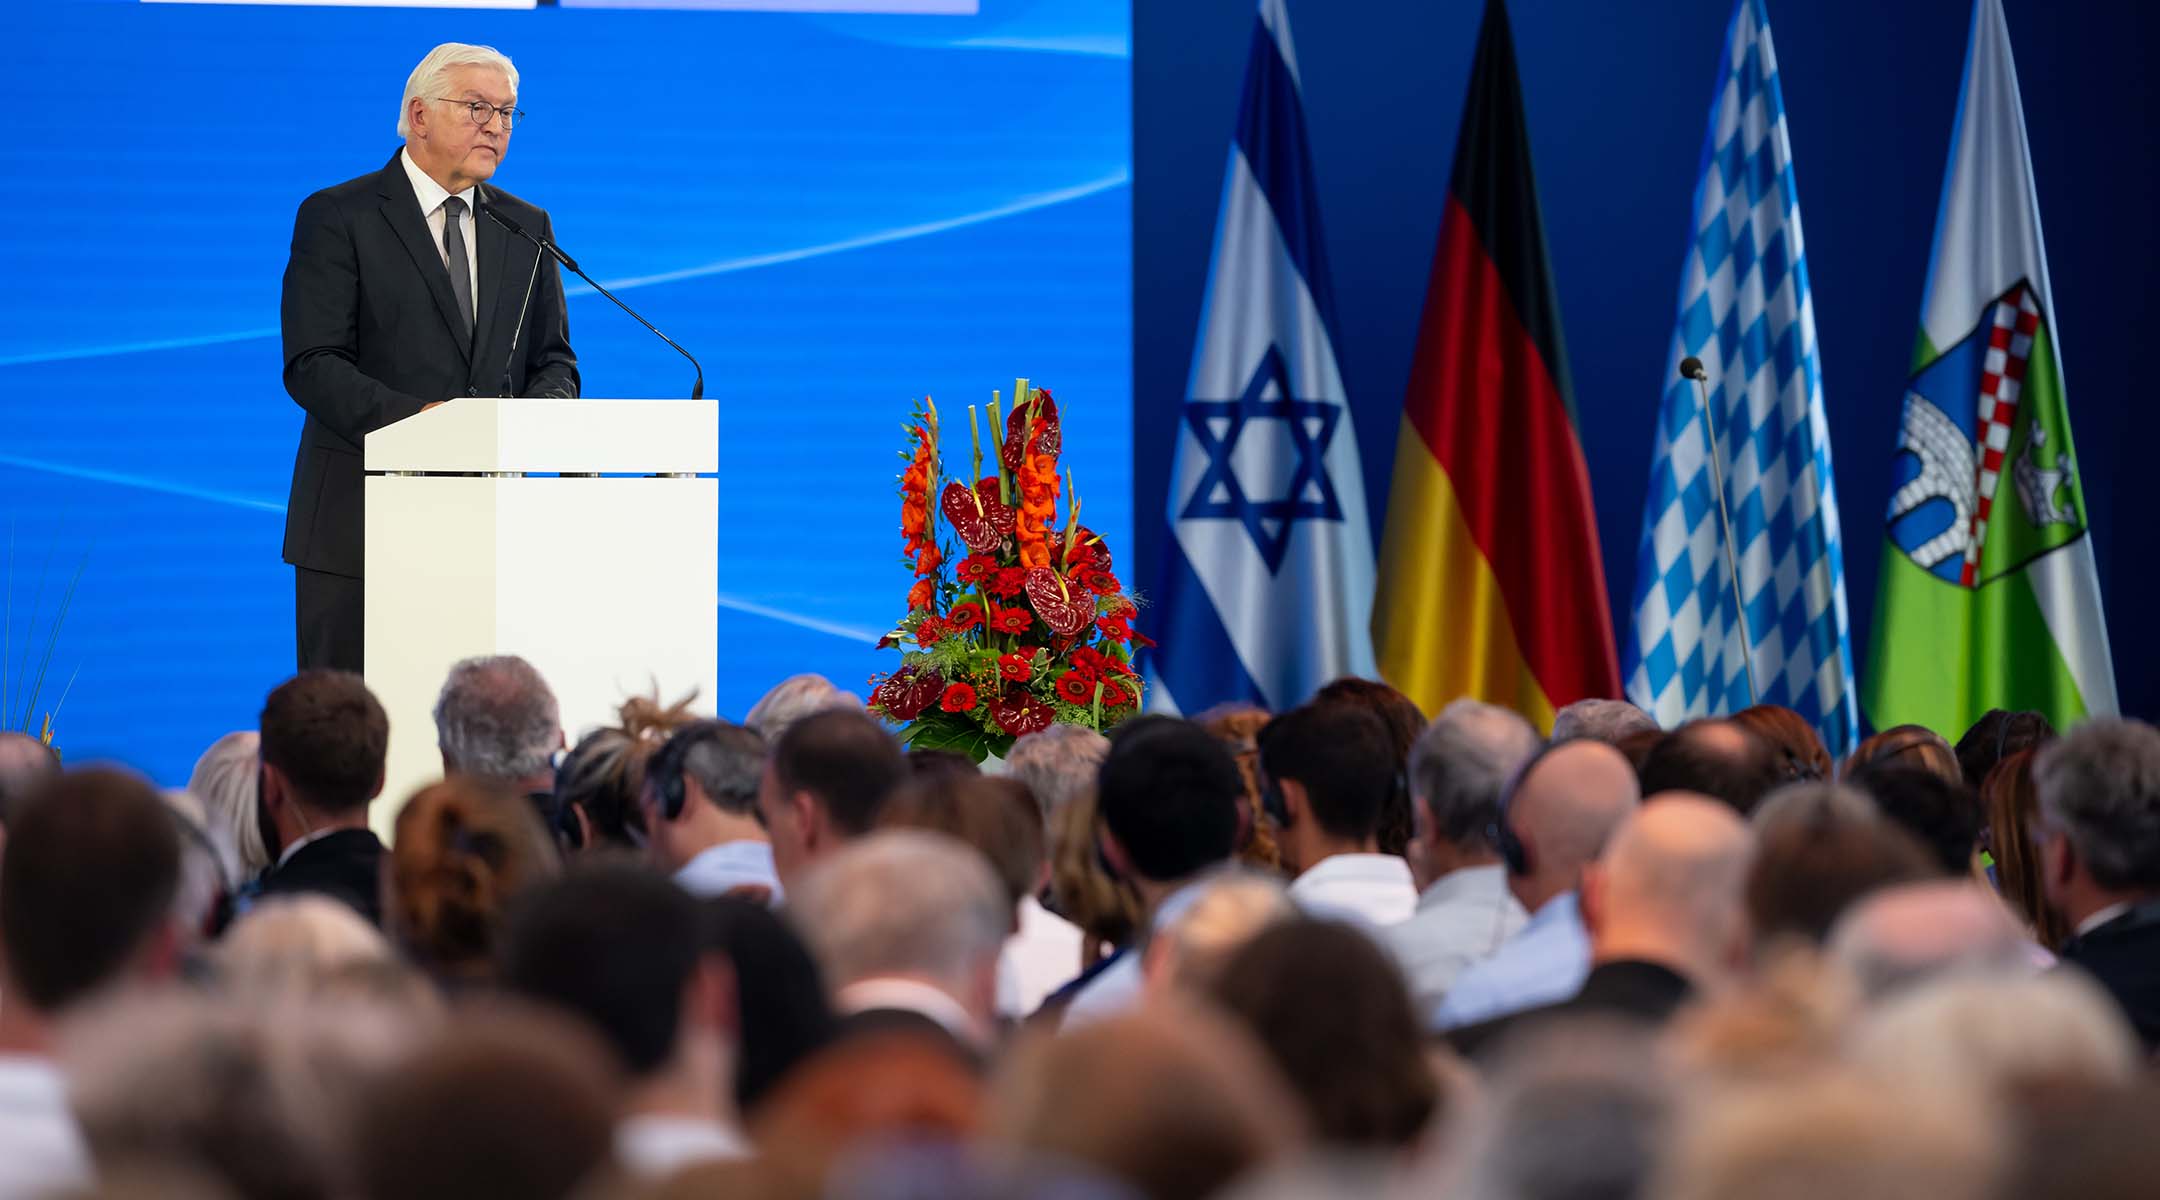 German President Frank-Walter Steinmeier speaks at a commemoration ceremony to mark the 50th anniversary of the attack on Israeli athletes at the 1972 Munich Olympics. (Sven Hoppe/picture alliance via Getty Images)